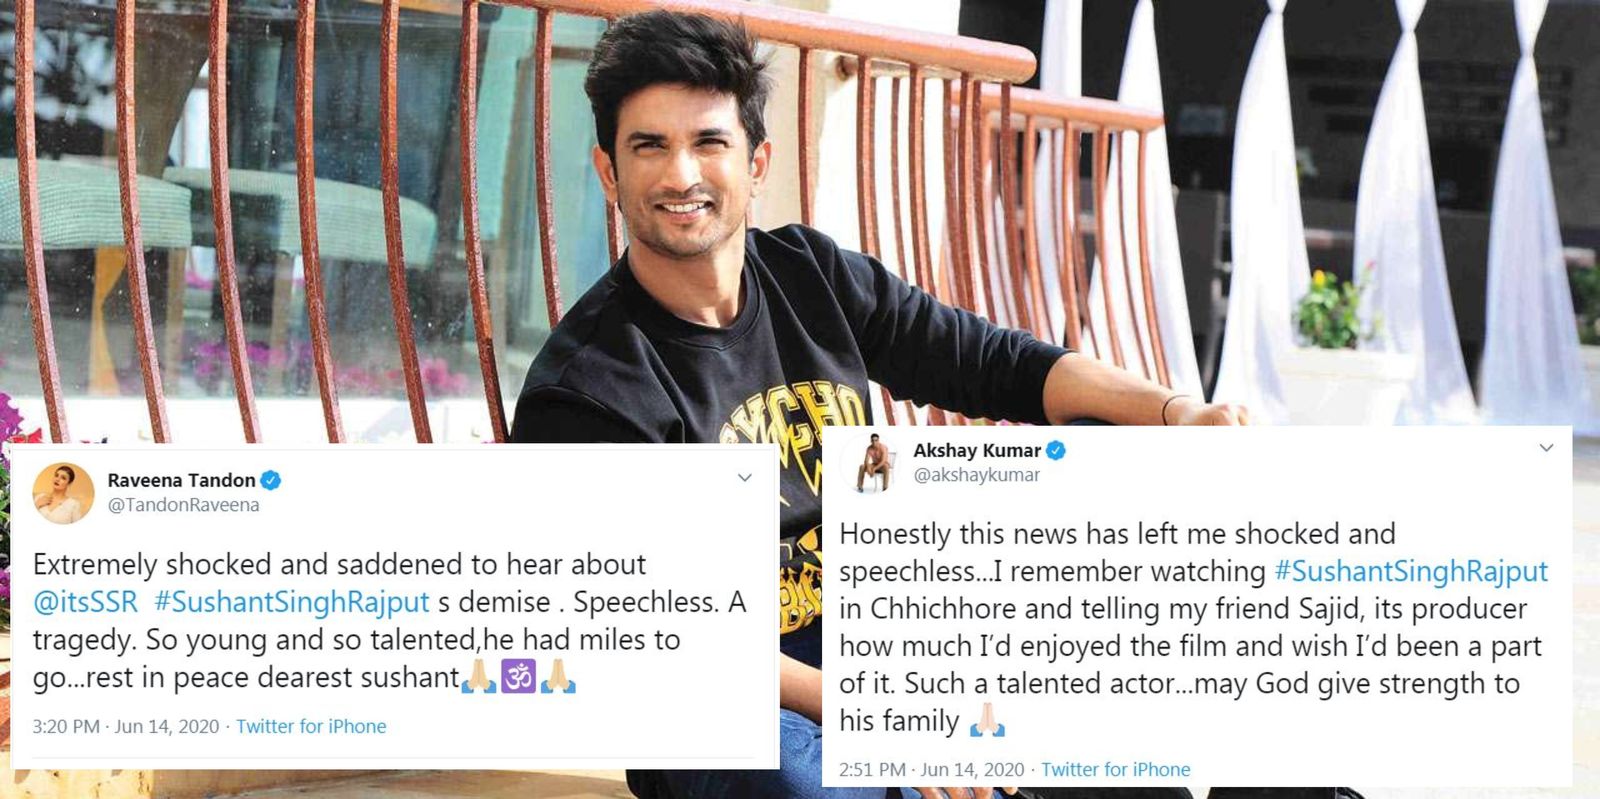 Sushant Singh Rajput Death: Akshay Kumar, Ashutosh Gowarikar And Other Actors And Cricketers Mourn His Death